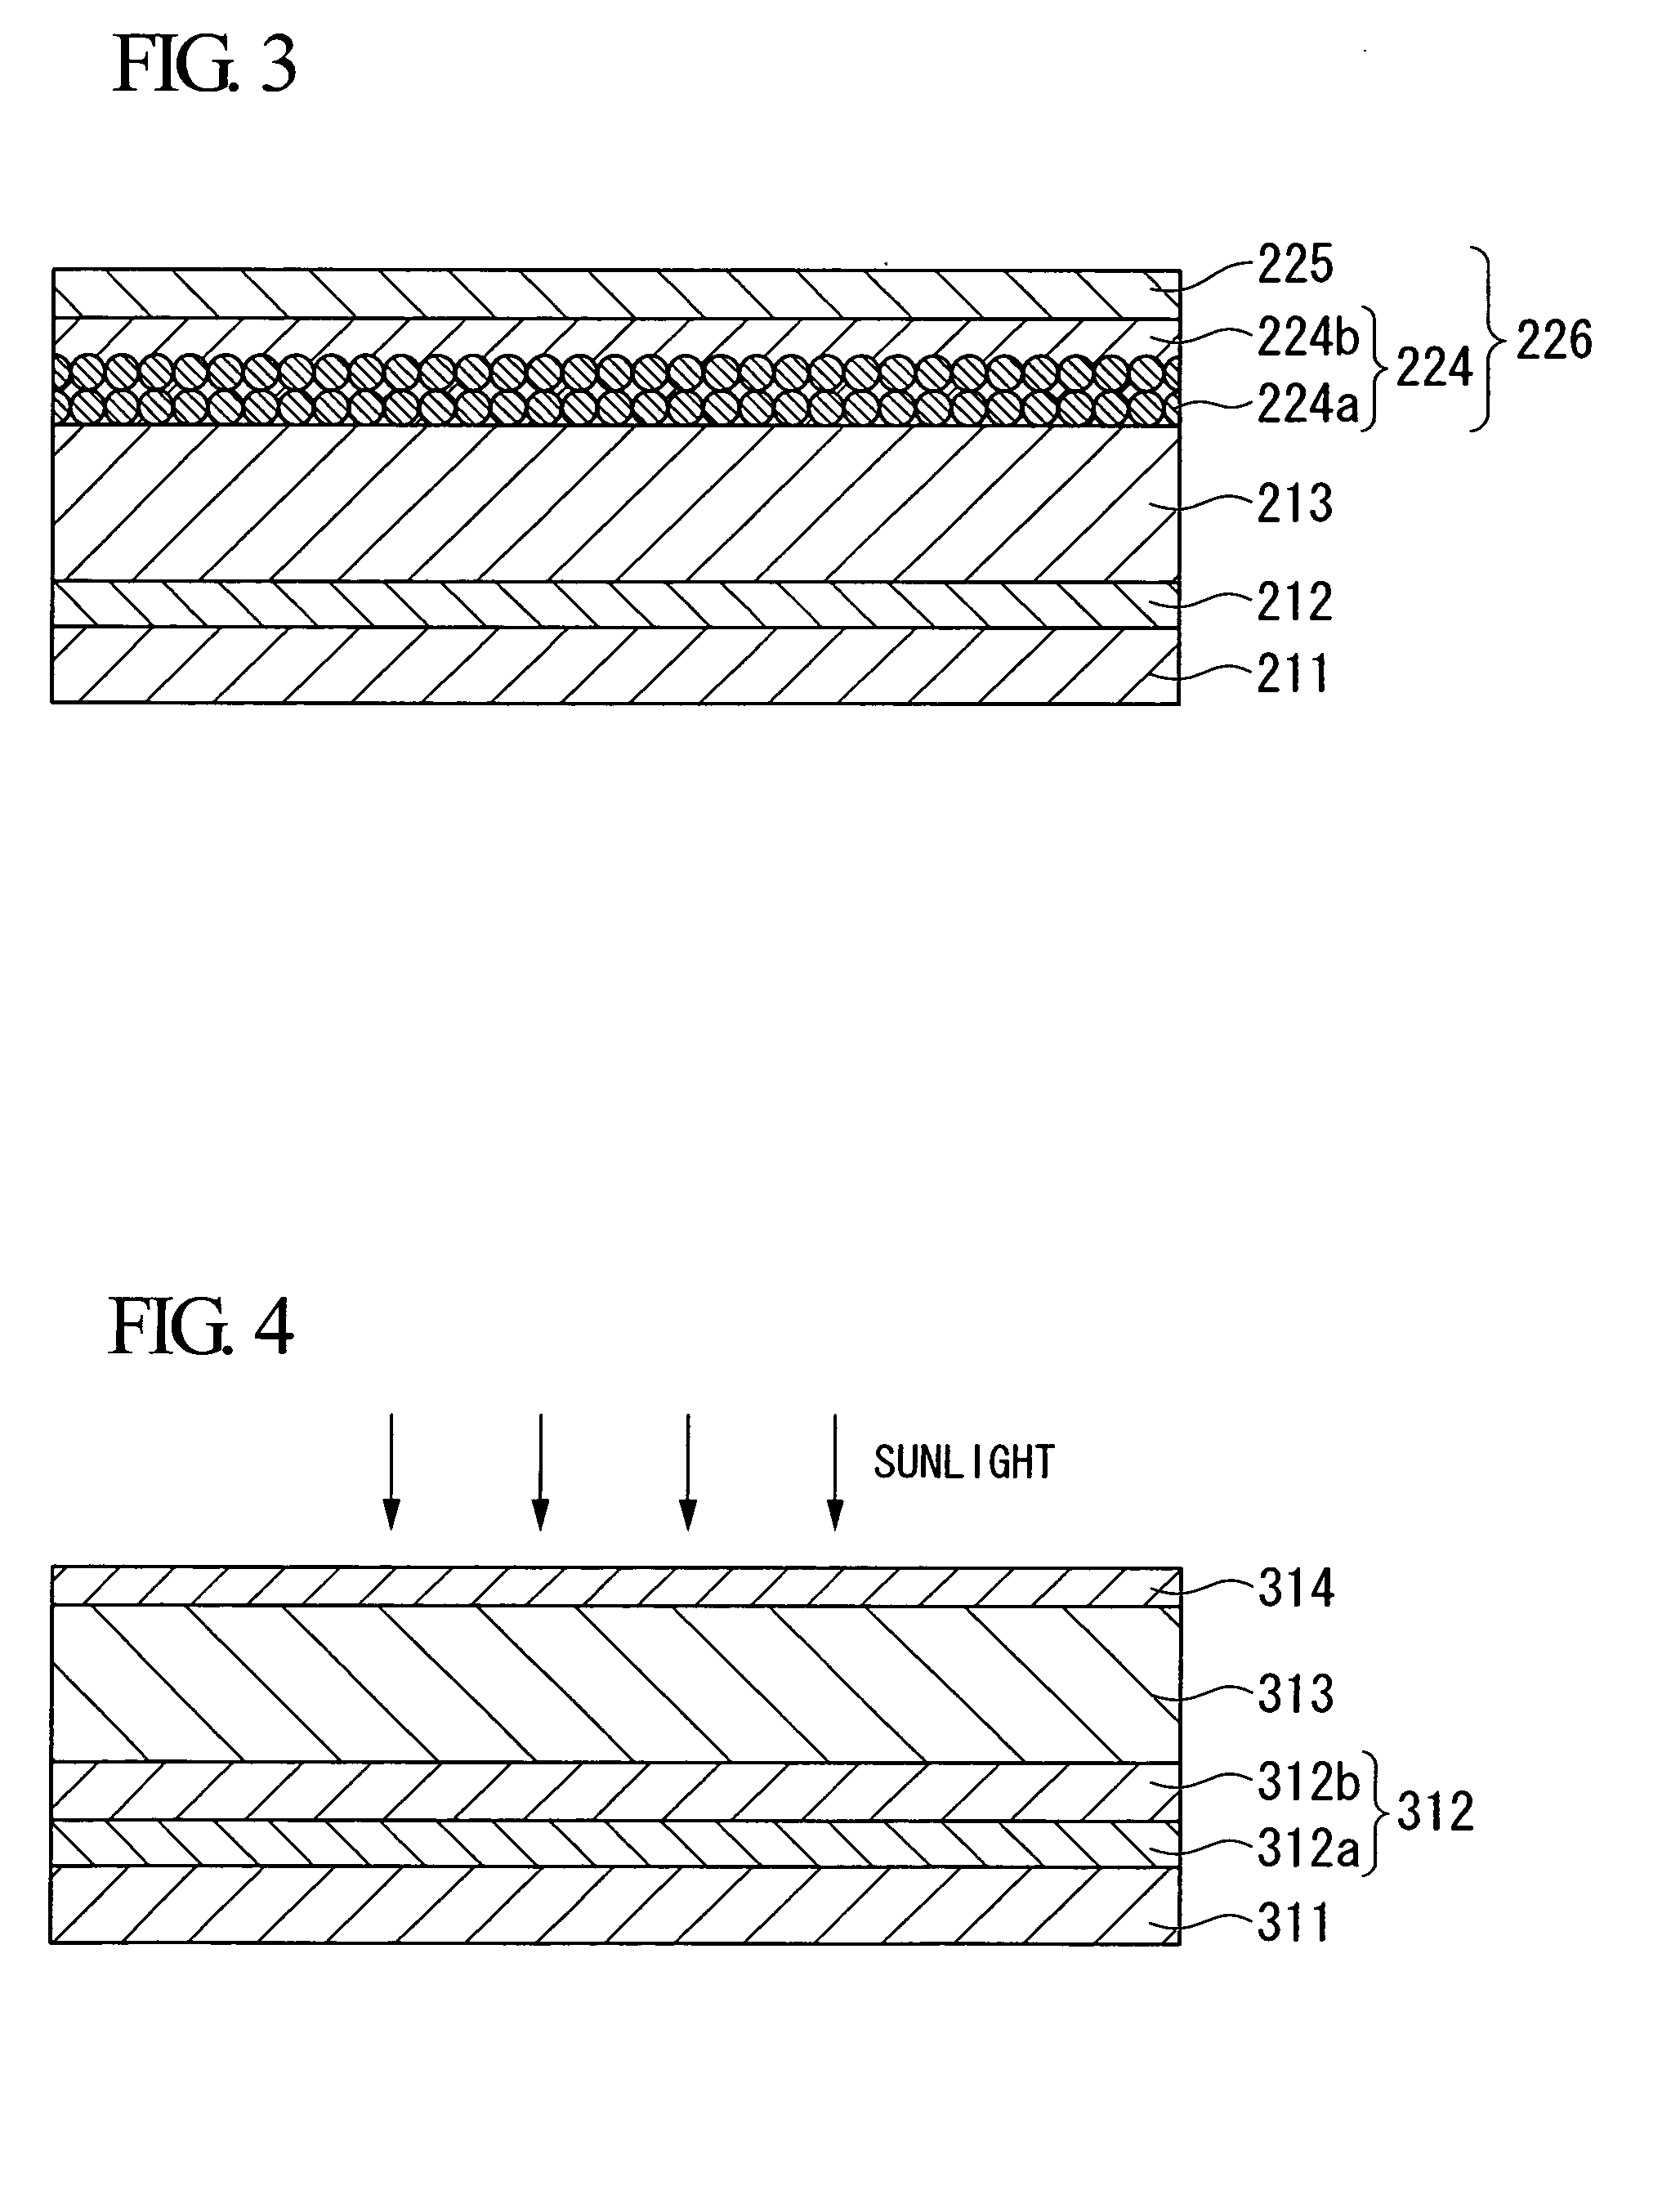 Comppsite film for superstrate solar cell, method for producing the composite film for superstrate solar cell, composite film for substrate solar cell, and method for porducing the composite film for substrate solar cell